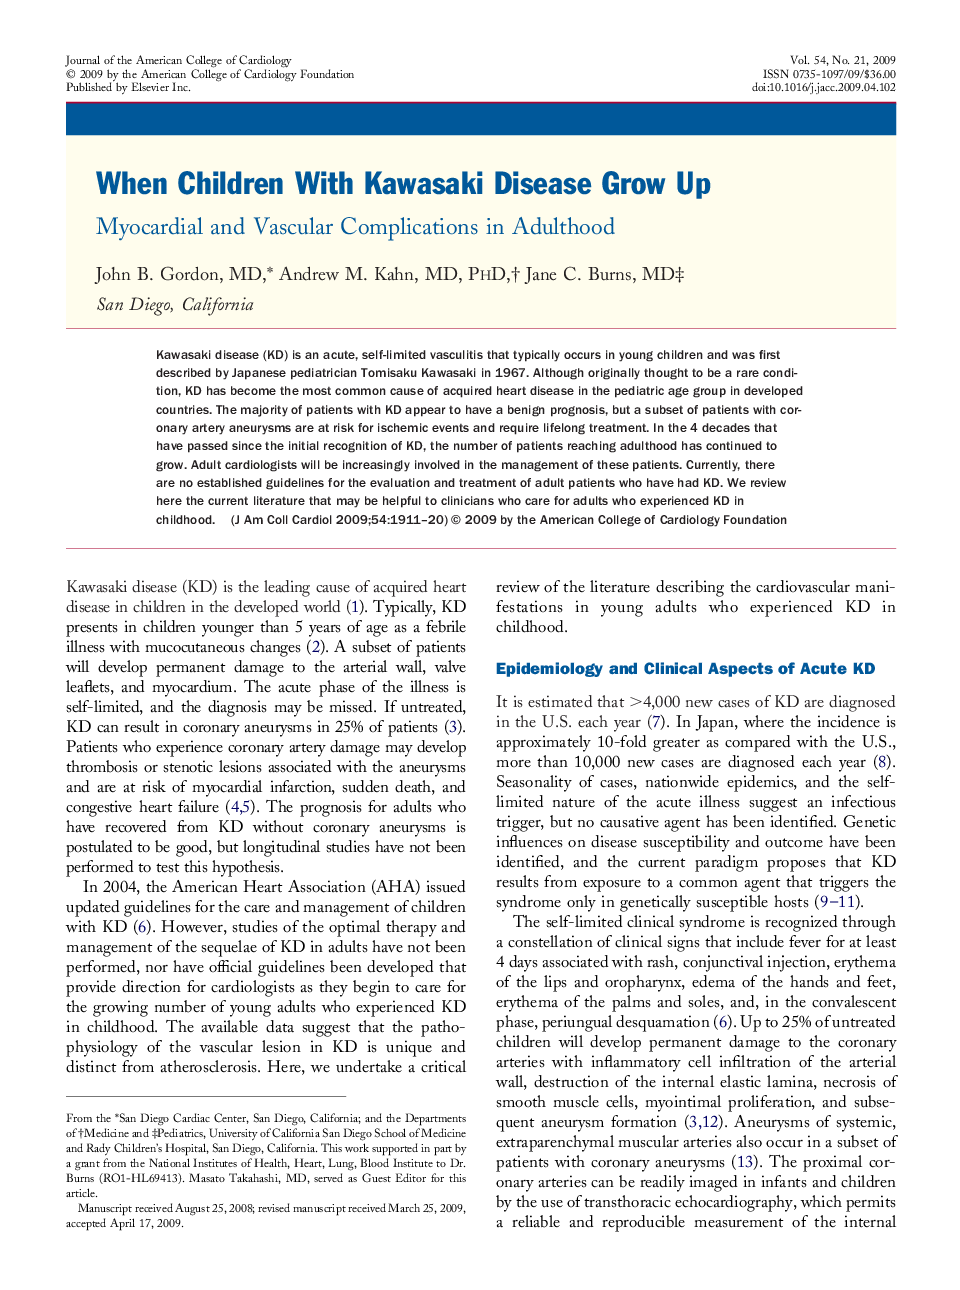 When Children With Kawasaki Disease Grow Up : Myocardial and Vascular Complications in Adulthood